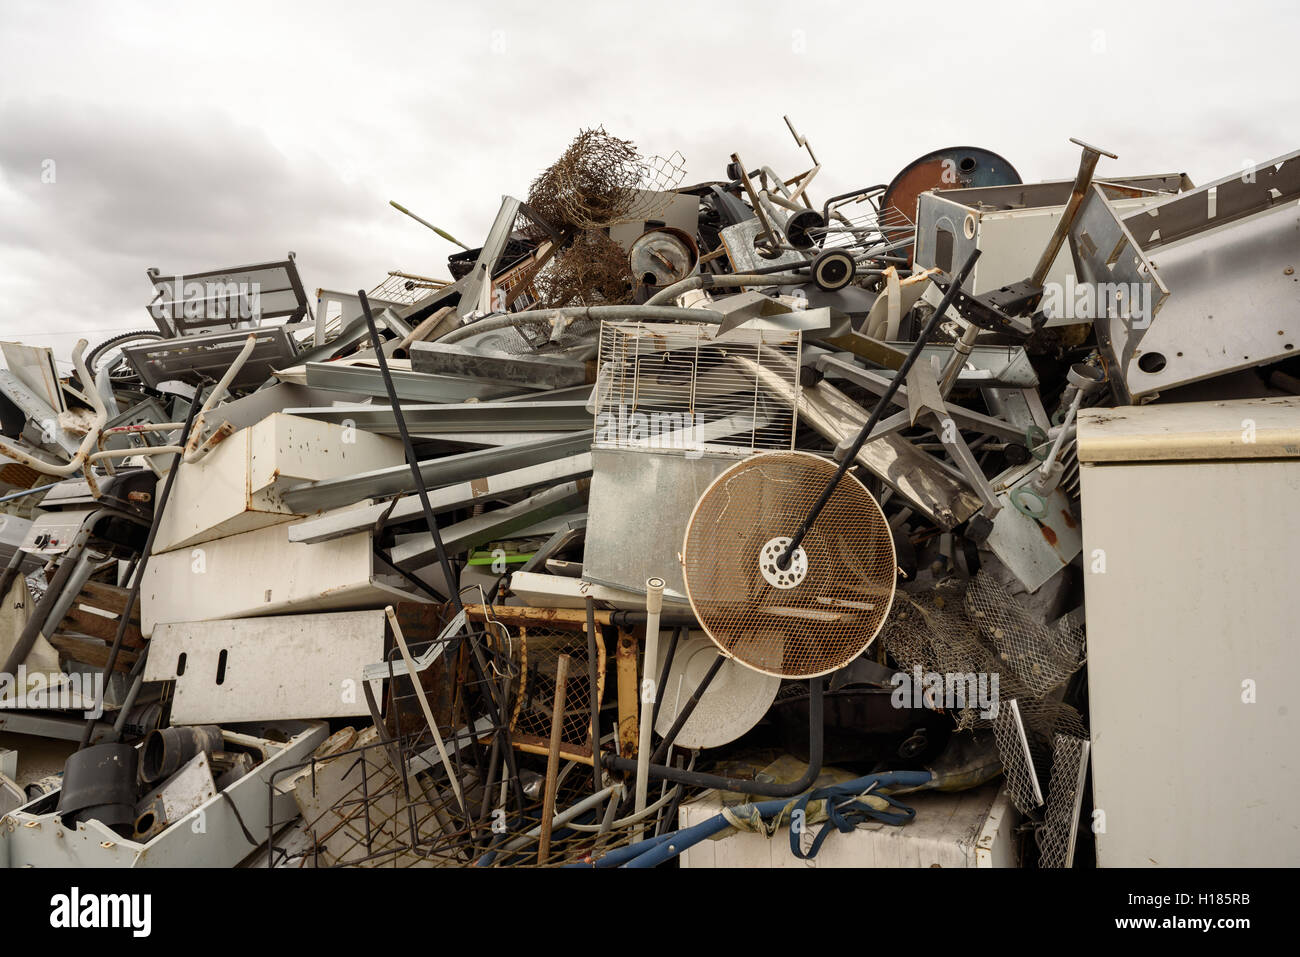 Broken pile of scrap metal and broken household white goods at a recycling dump with an overcast depressing sky Stock Photo